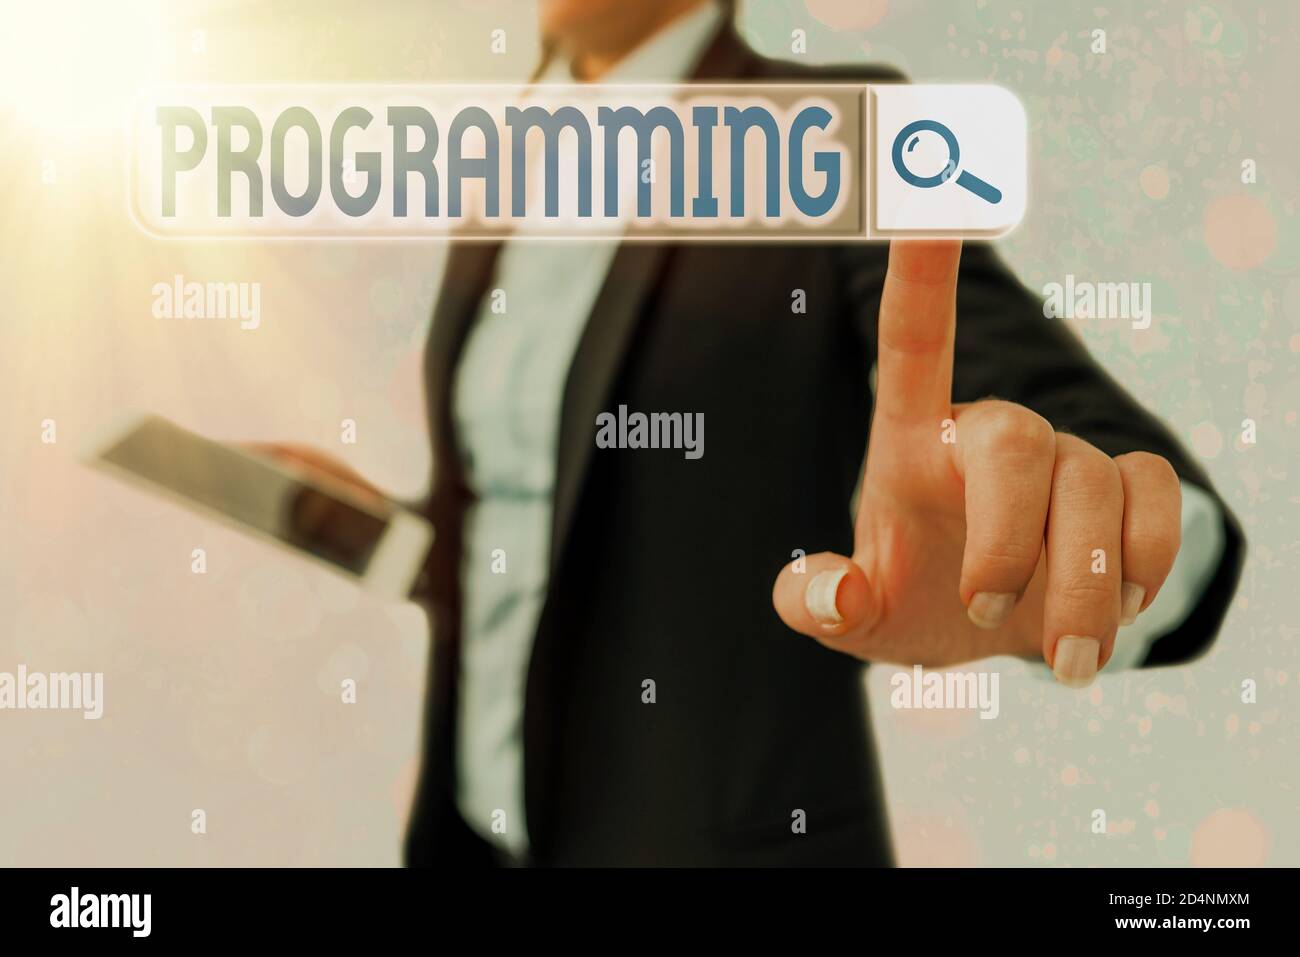 Conceptual hand writing showing Programming. Concept meaning the process of preparing an instructional program for a device Web search digital futuris Stock Photo